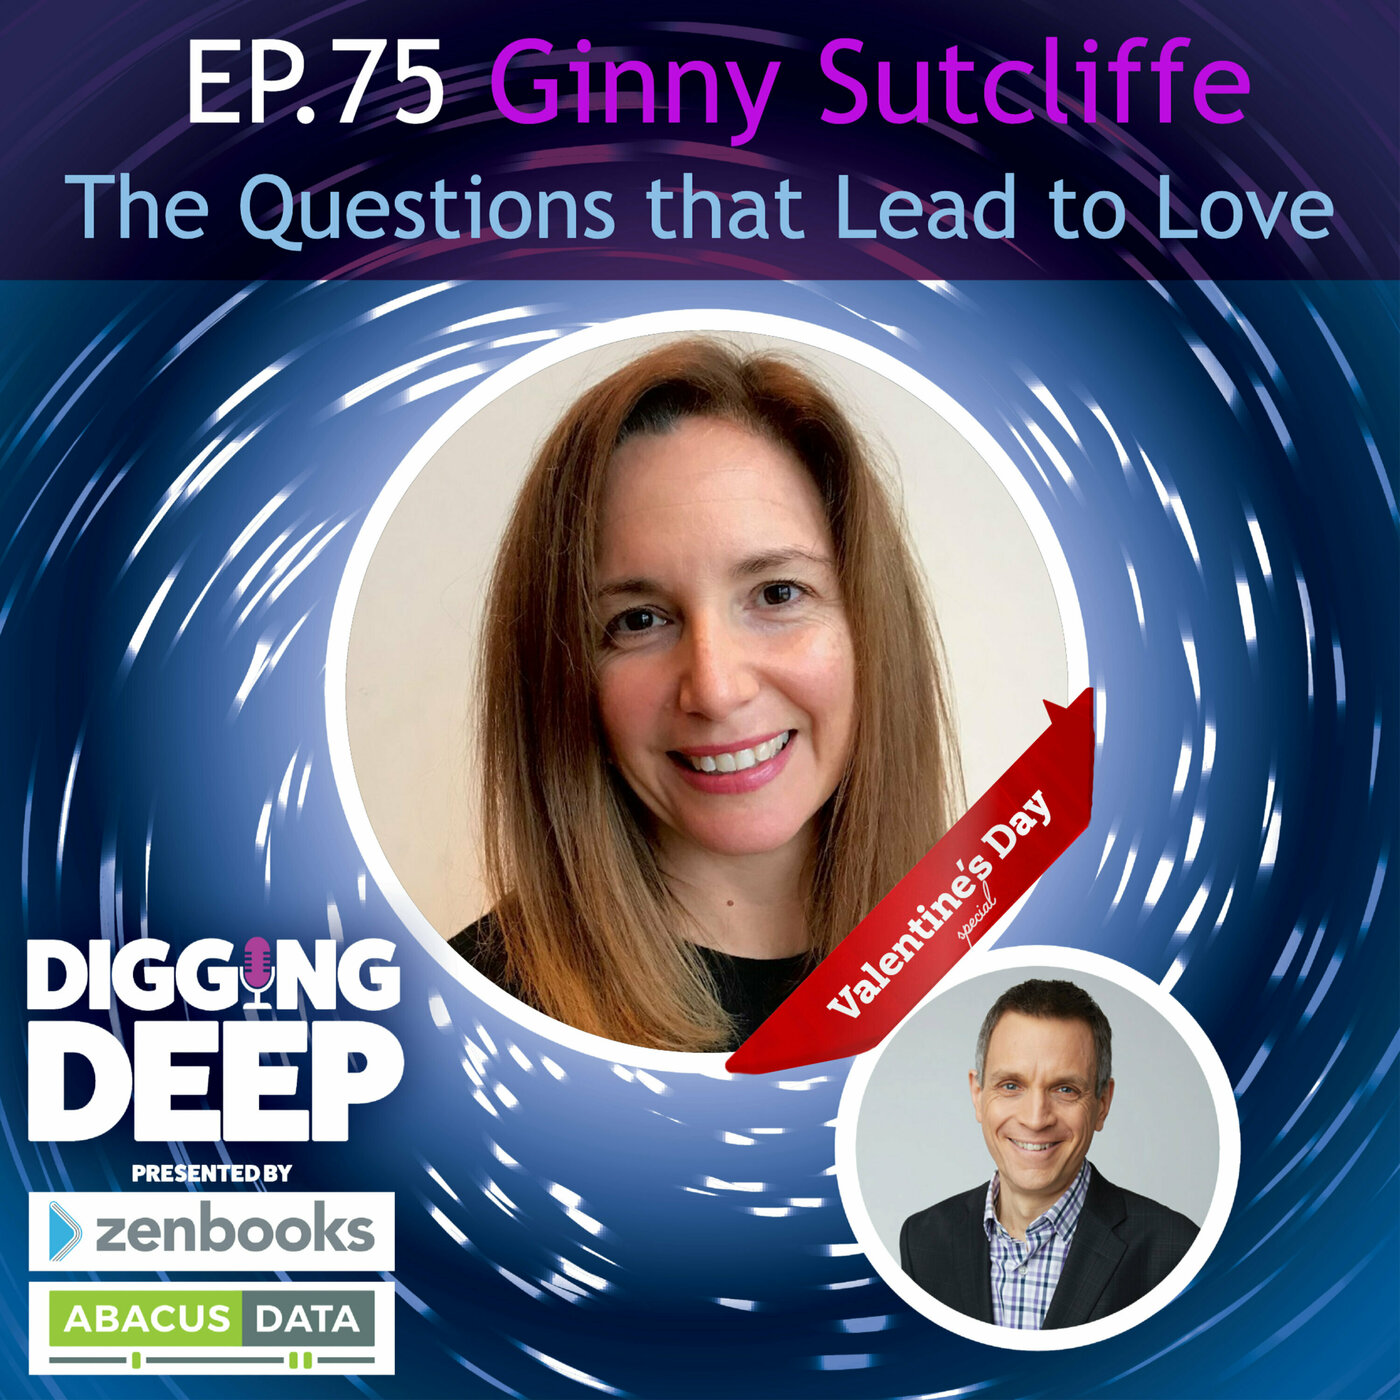 Ginny Sutcliffe: The Questions that Lead to Love